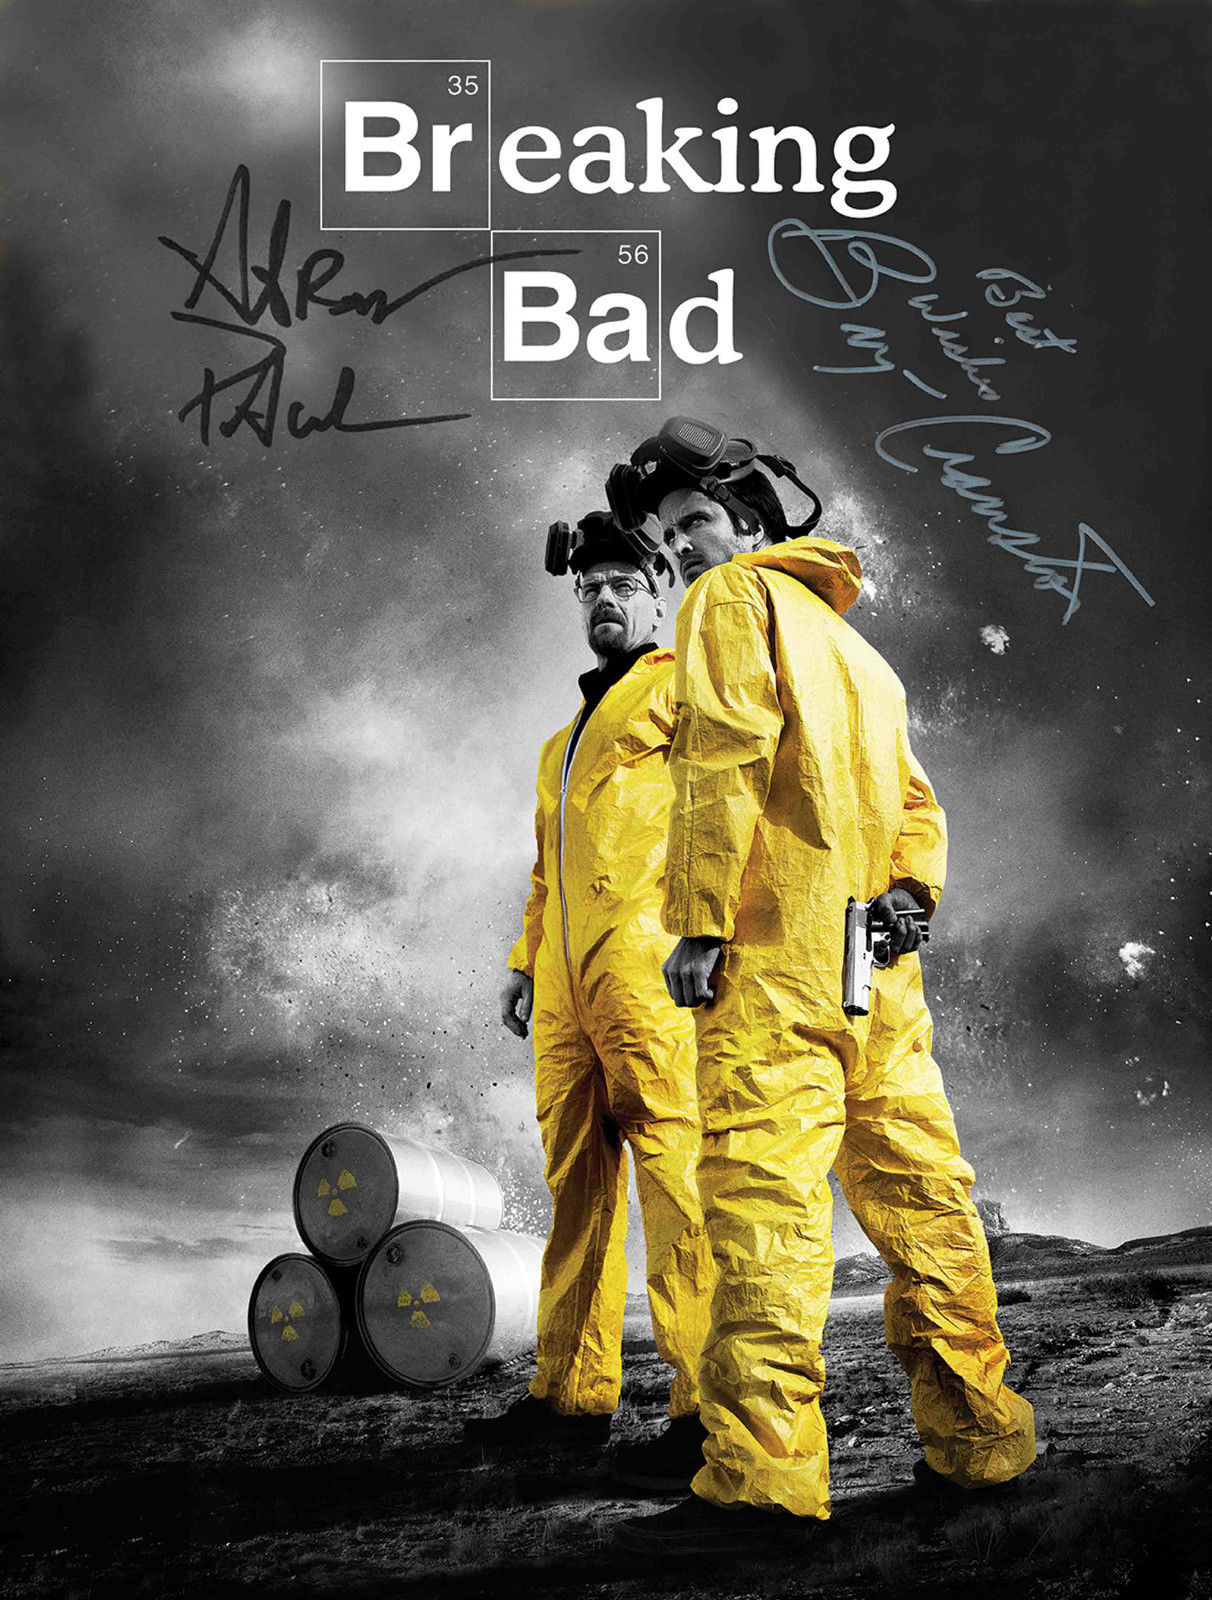 BREAKING BAD SIGNED AUTOGRAPH MOVIE POSTER A2 594 x 420mm (Very Rare)